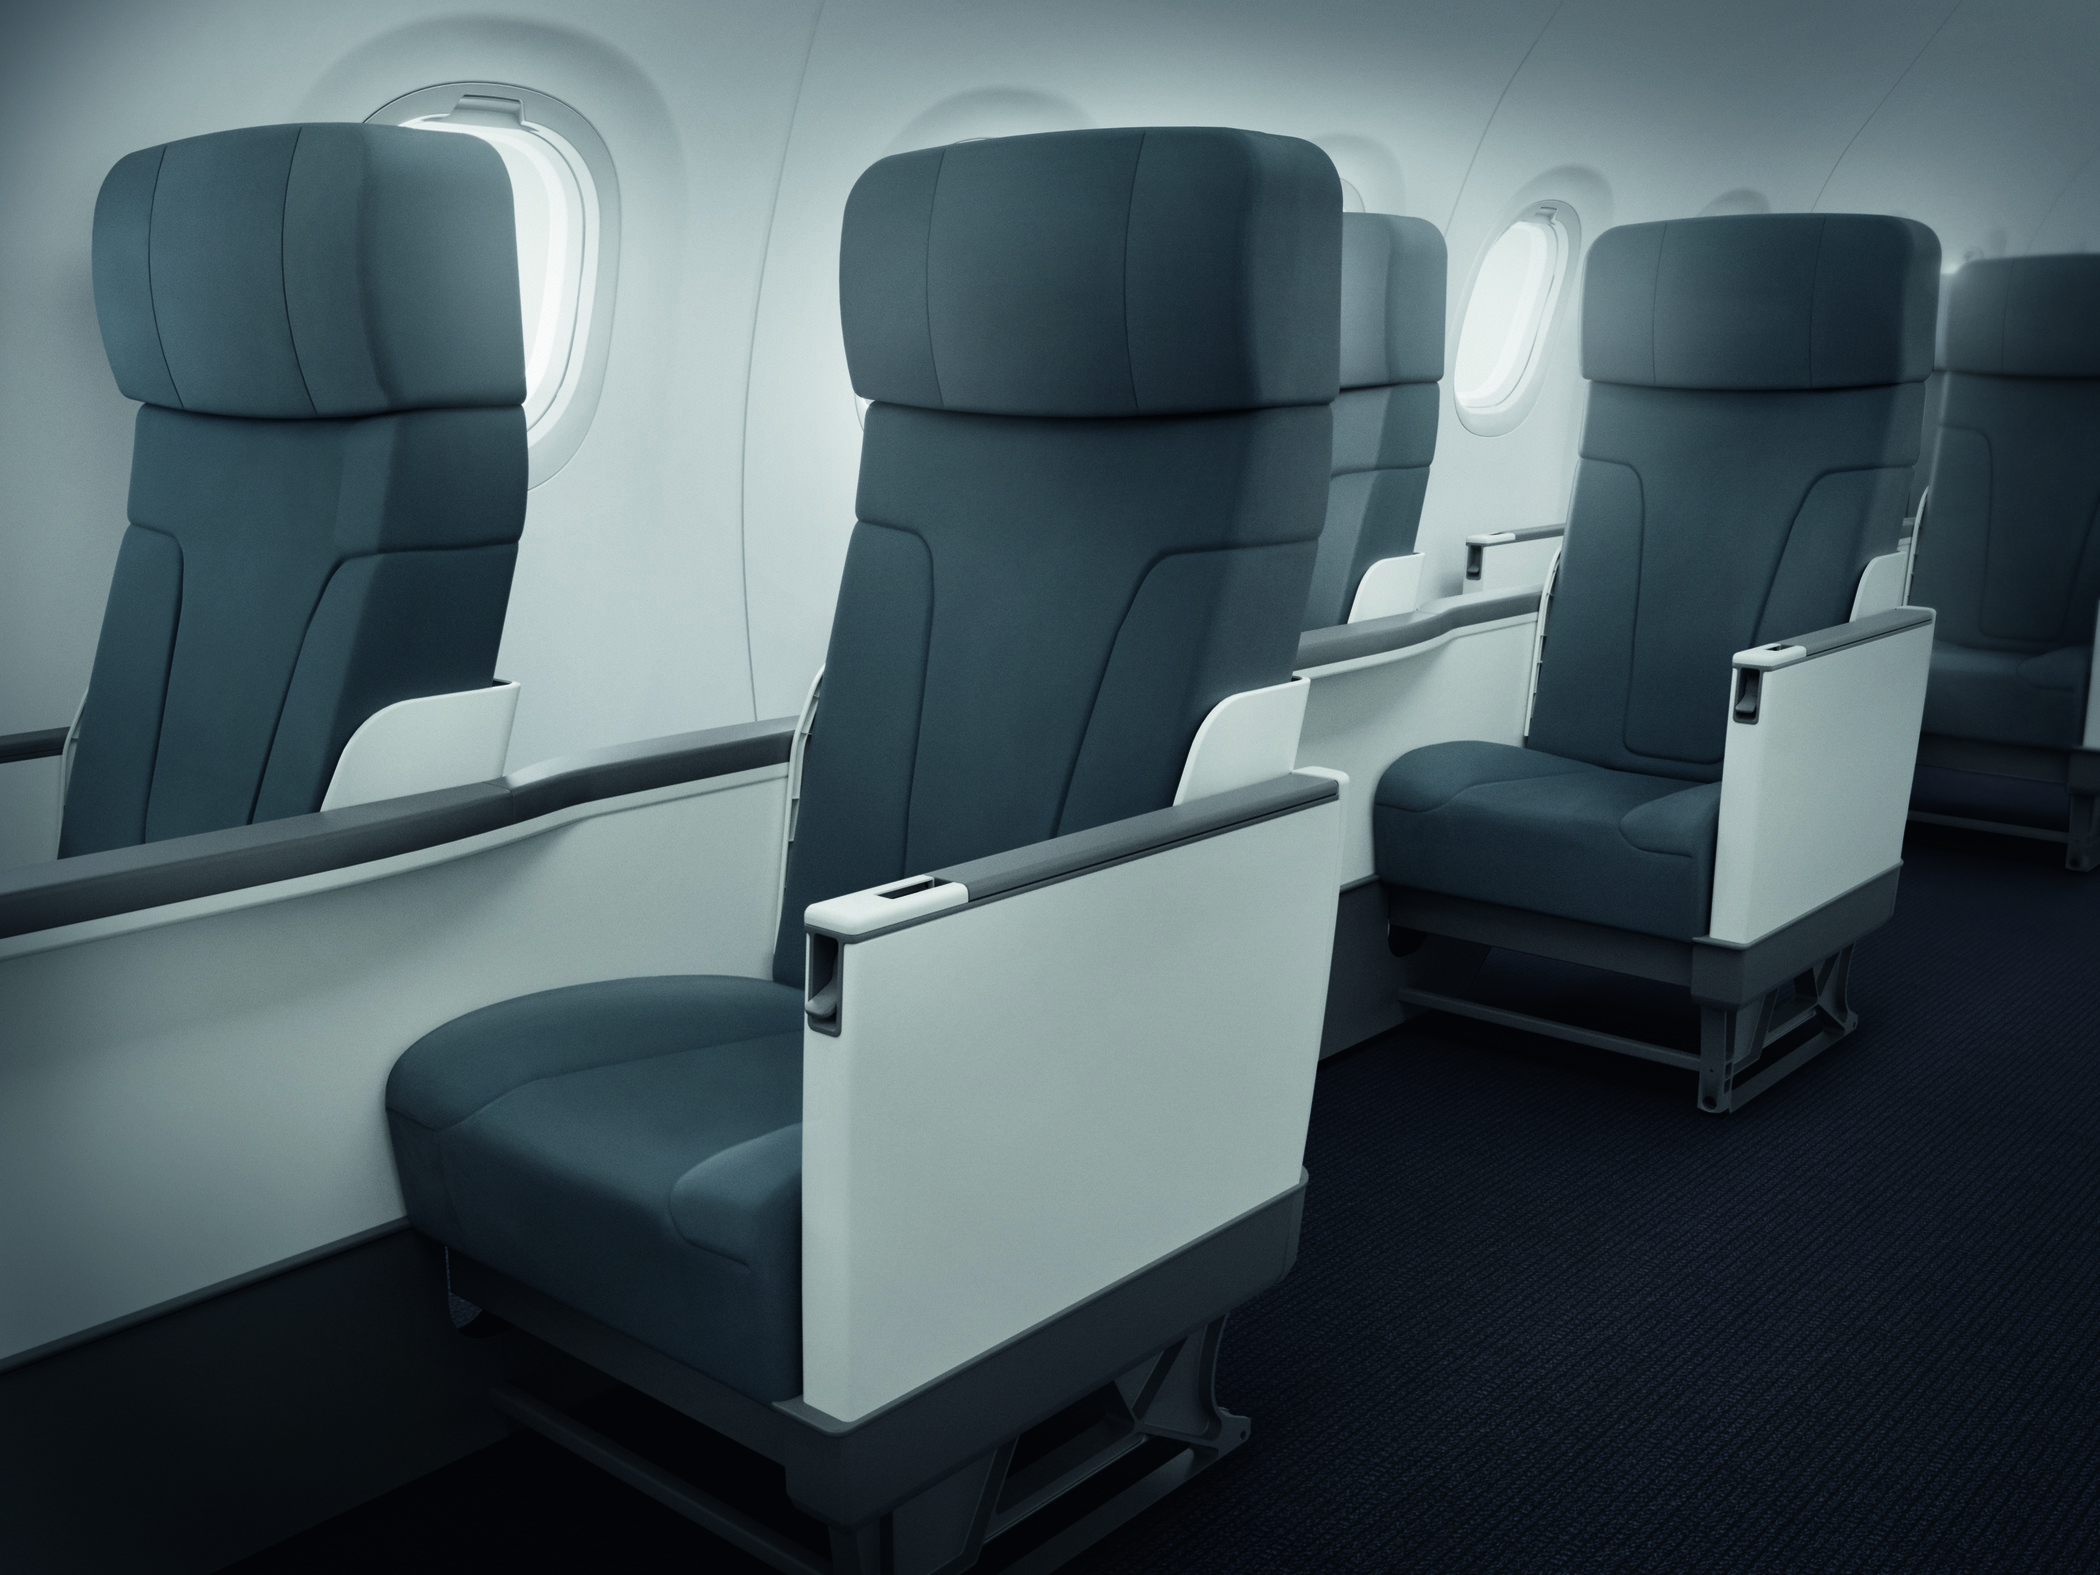 Wataniya’s E195-E2s will have 12 seats in a staggered layout 